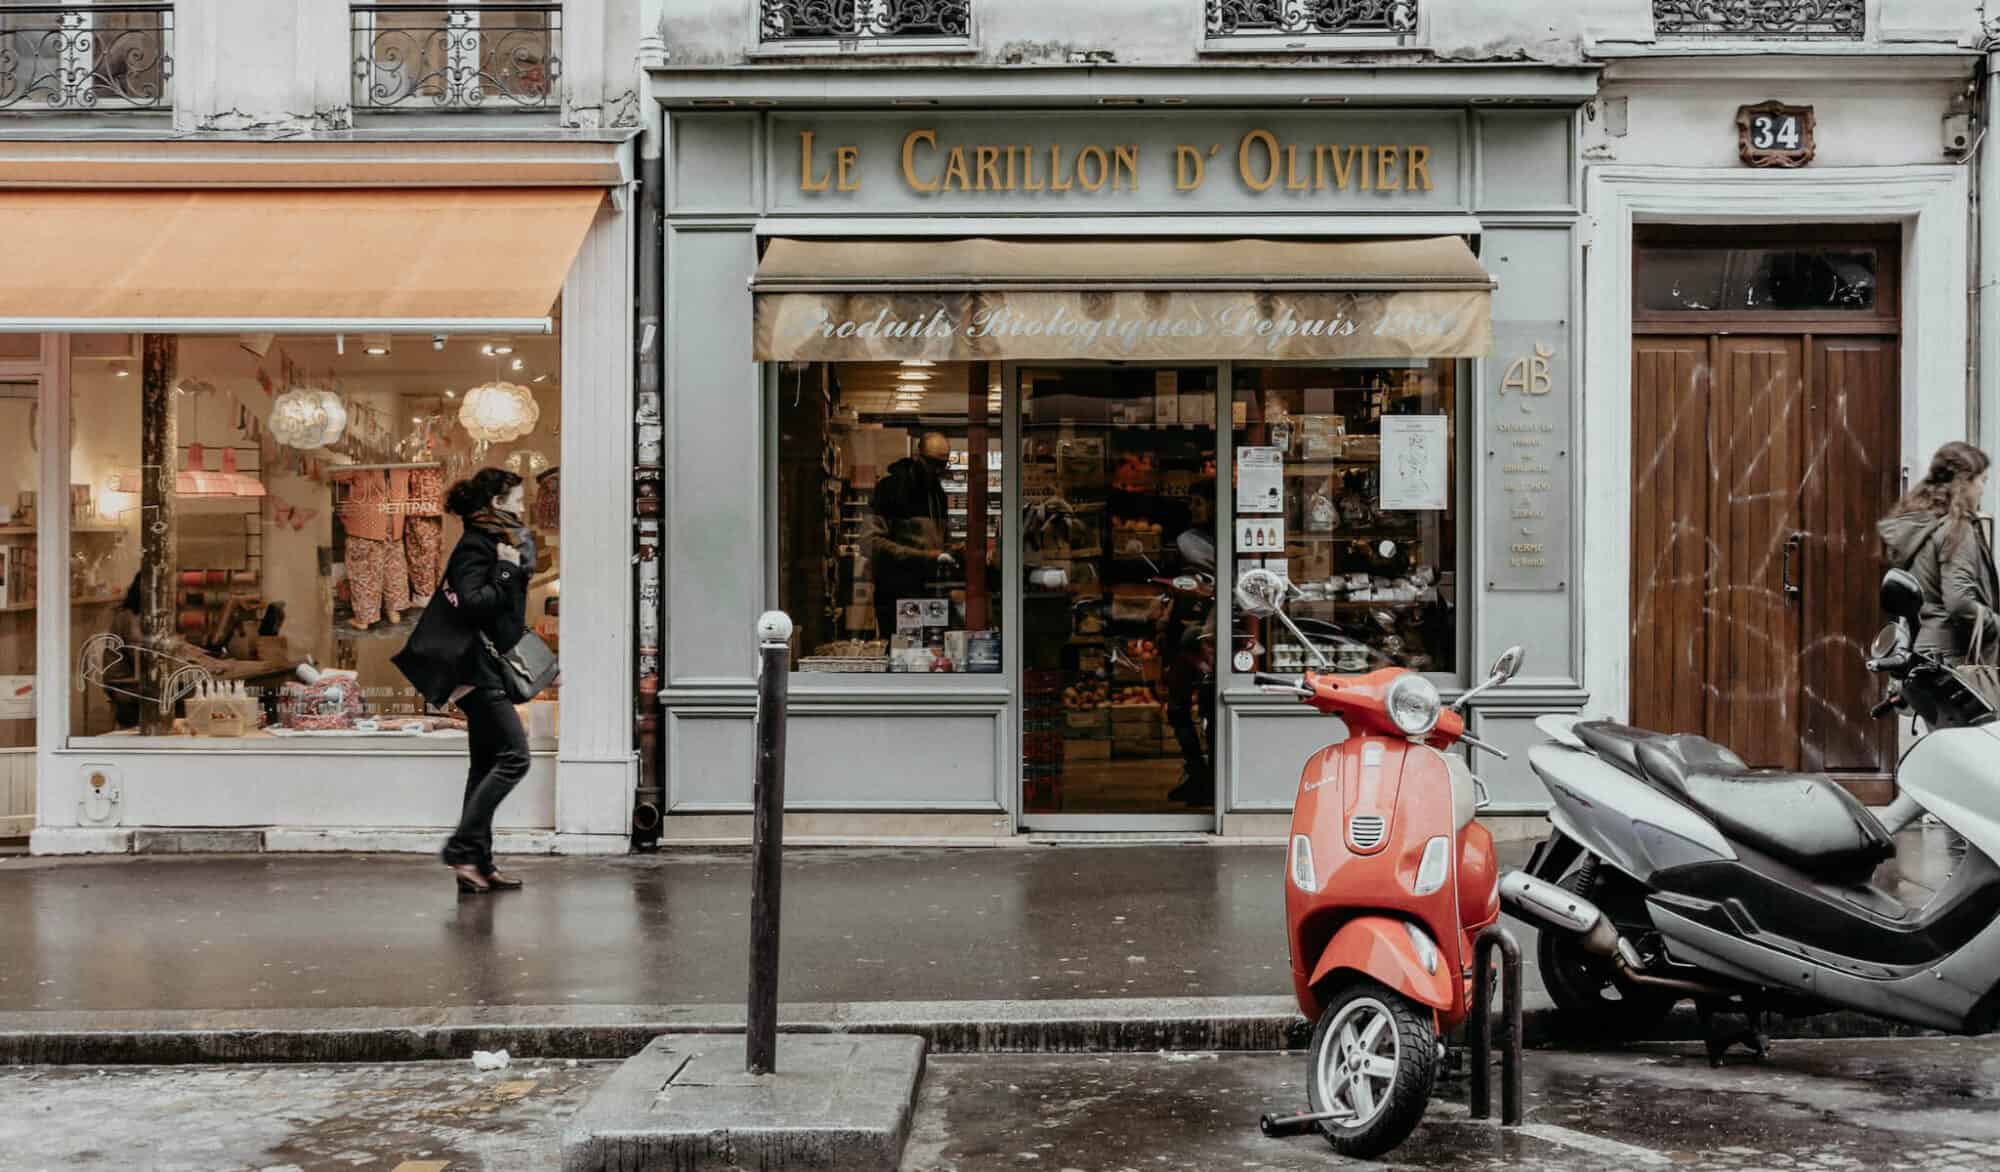 A woman in an all-black outfit walks by a Parisian pavement with stores and a parked red Vespa motorcycle